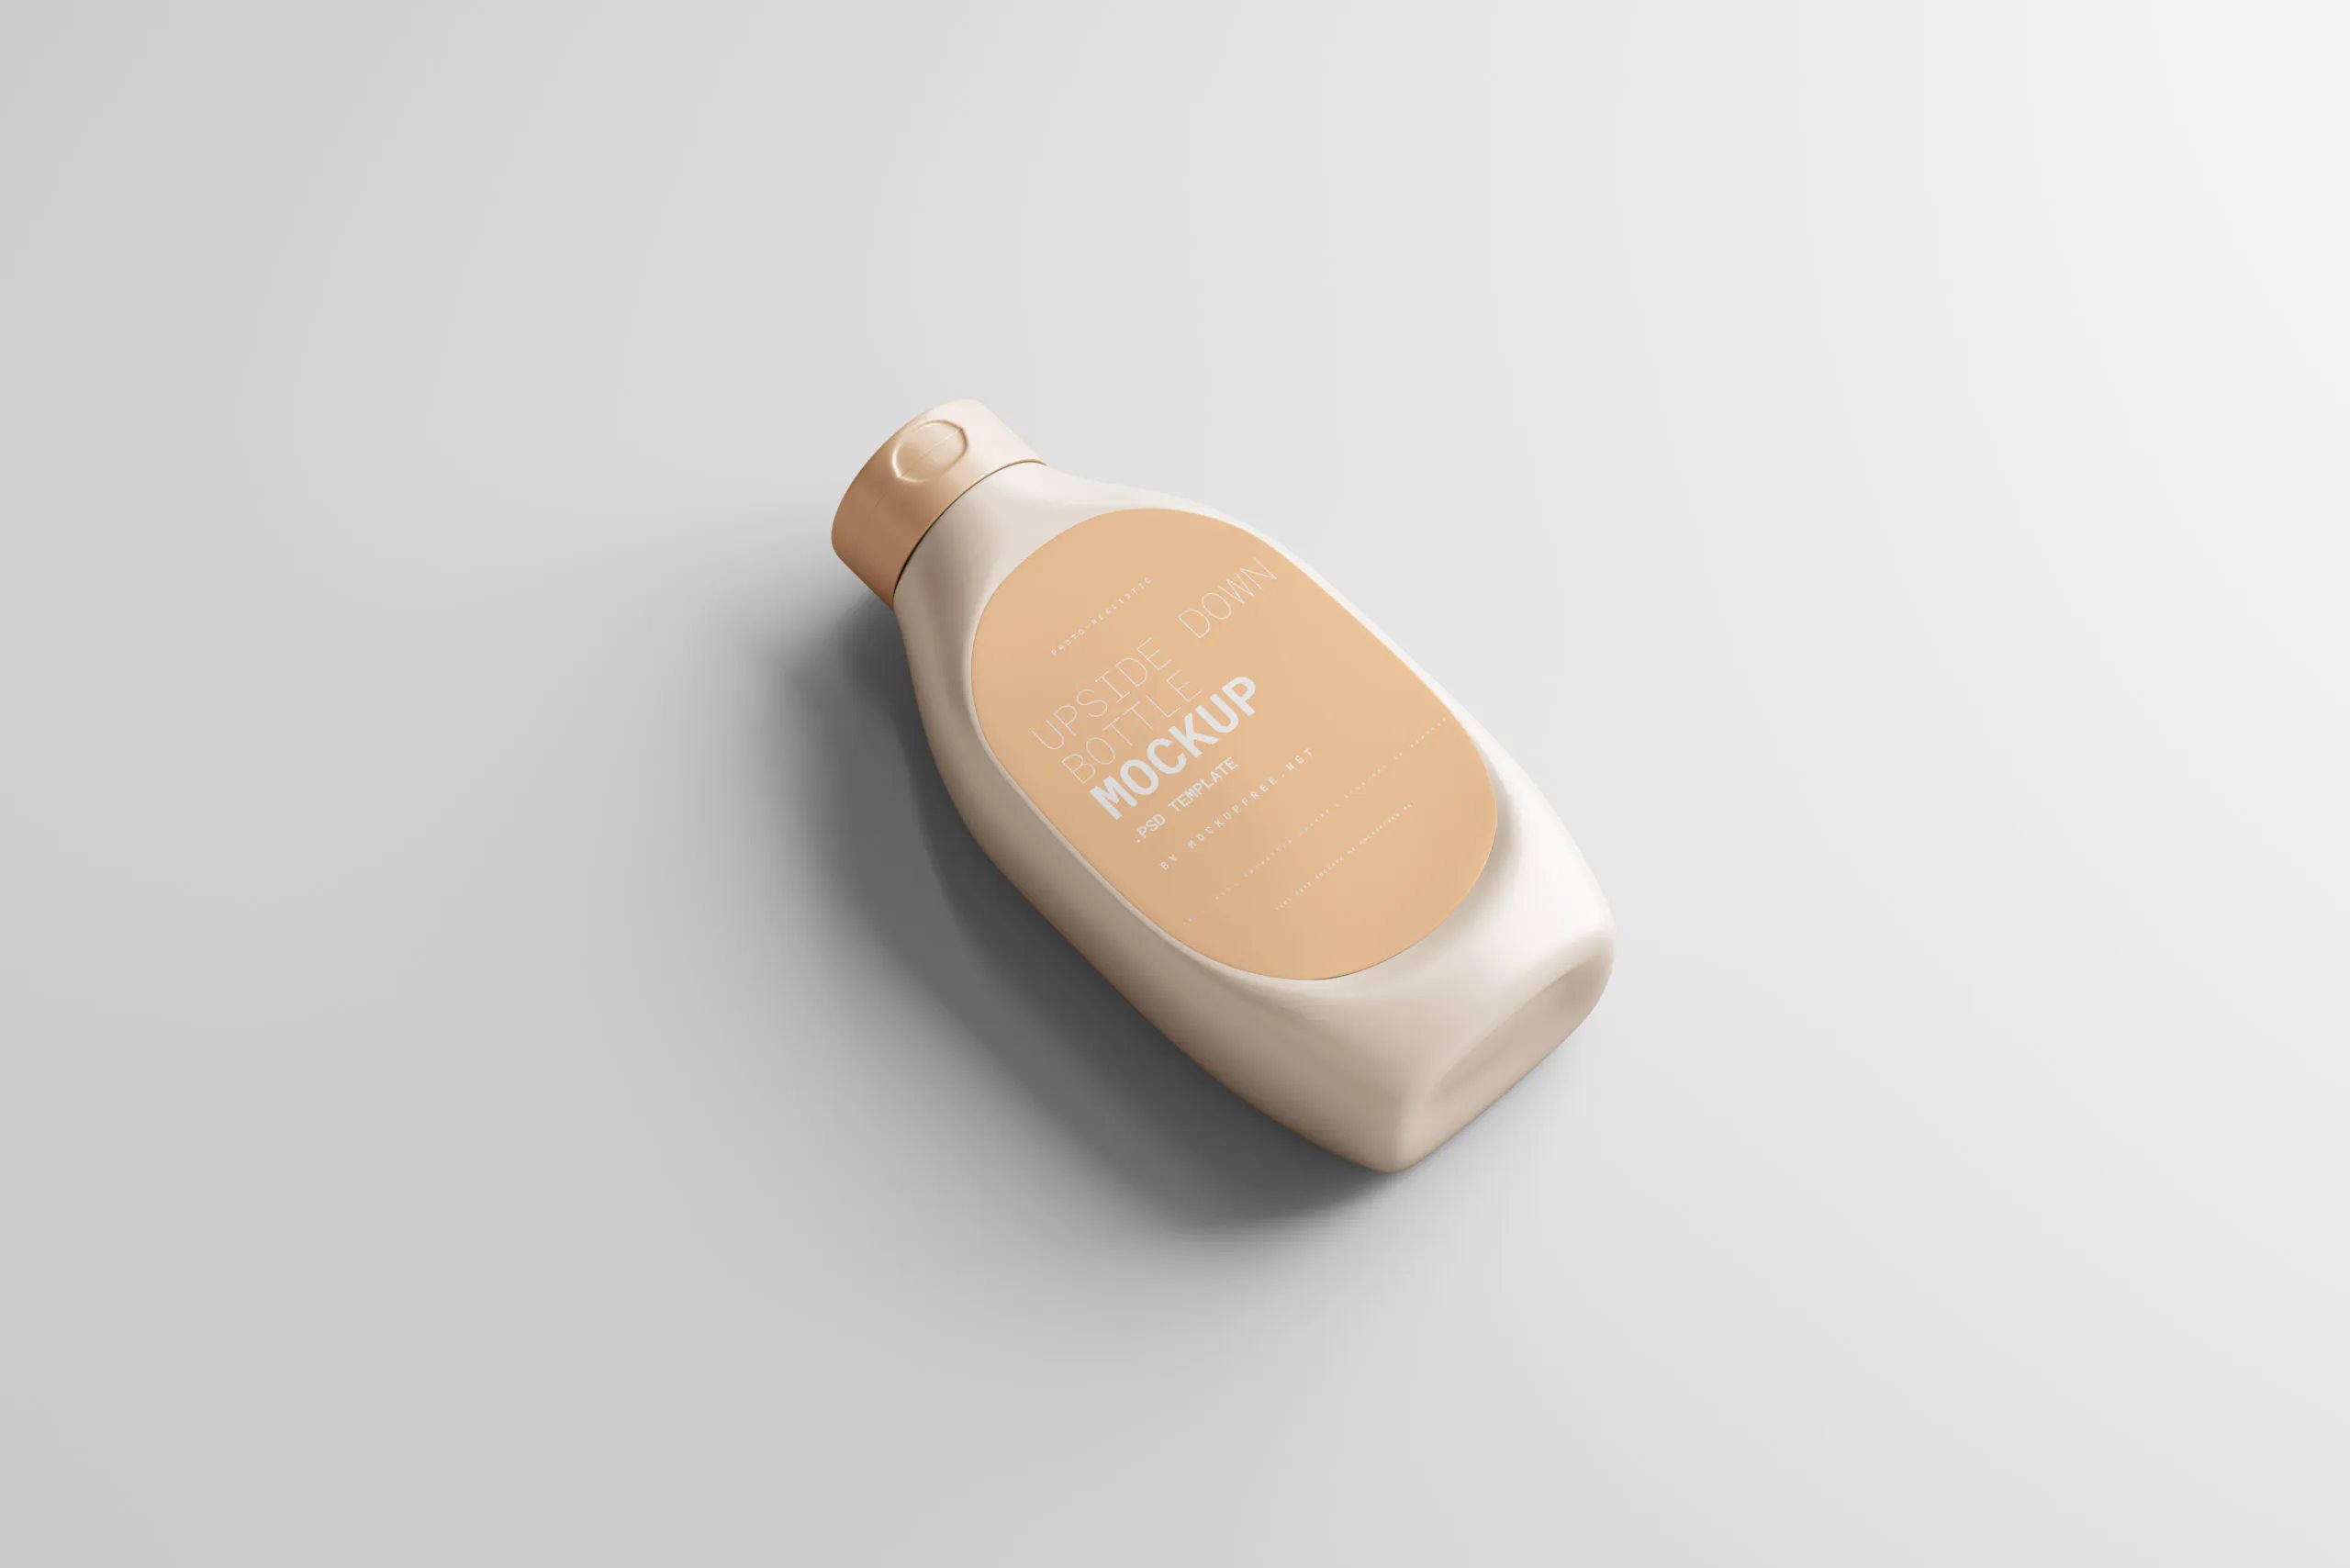 5 Upside Down Bottle Mockups in Different Visions FREE PSD